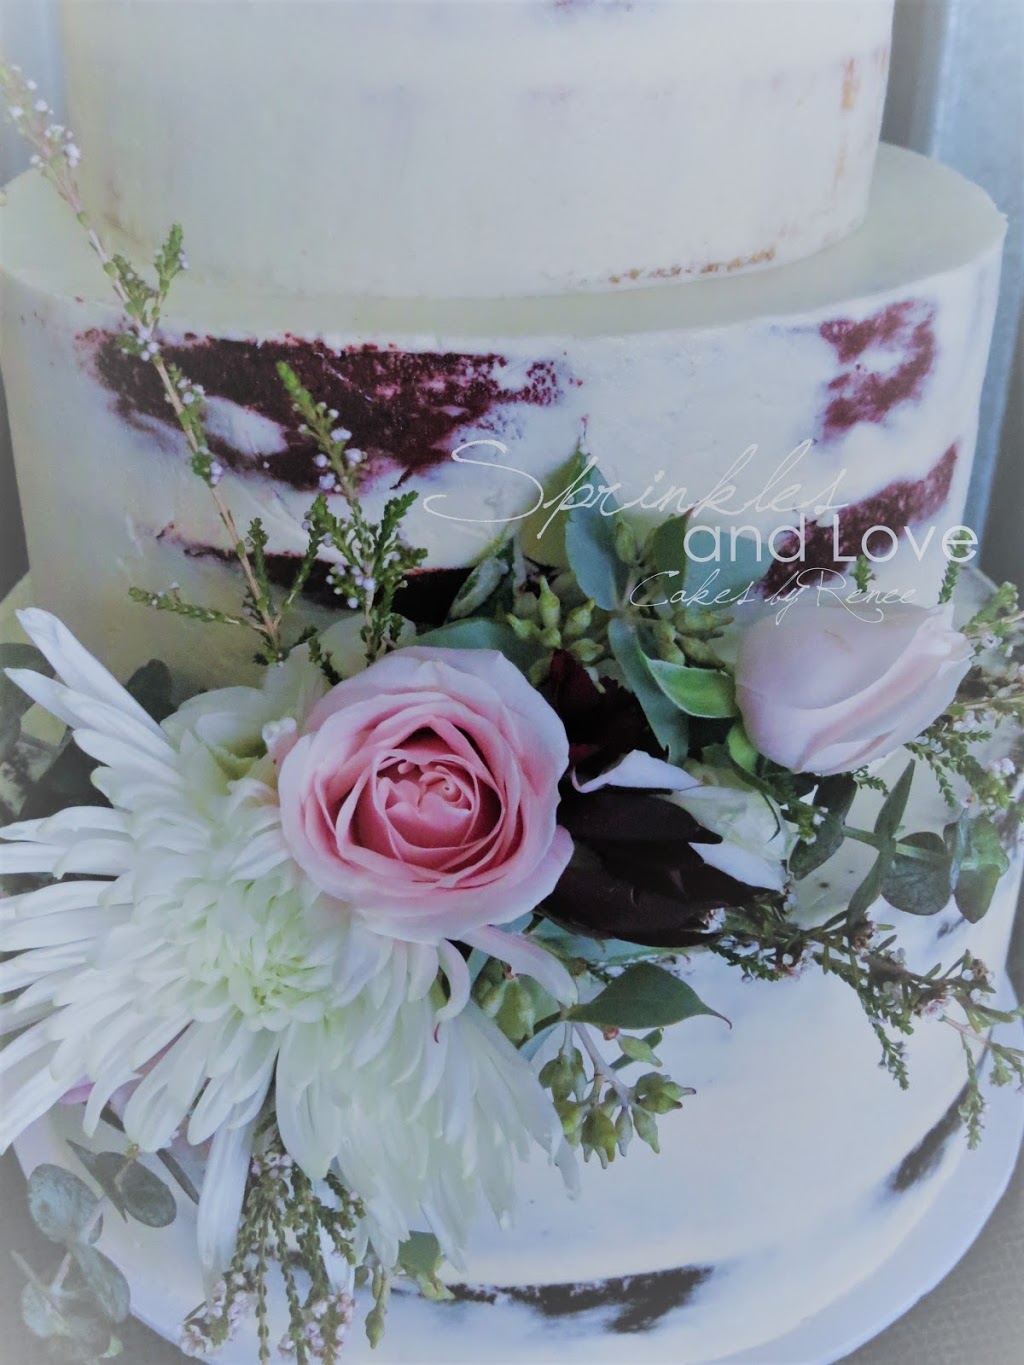 Sprinkles and Love - Cakes by Renee | bakery | 45 James Muscat Dr, Walkerston QLD 4751, Australia | 0429487634 OR +61 429 487 634